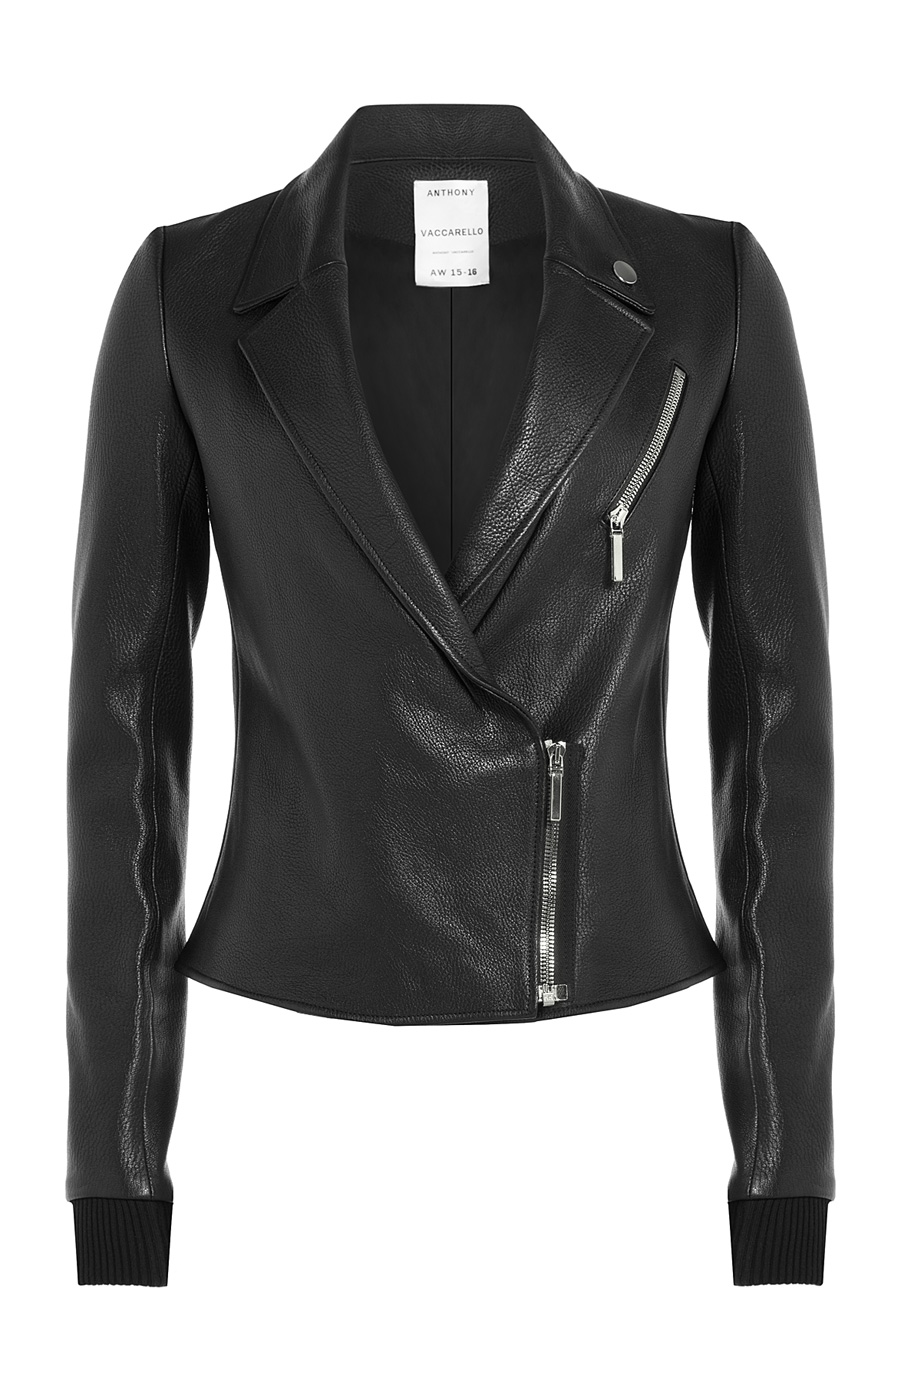 Anthony Vaccarello Leather Biker Jacket In Black | ModeSens